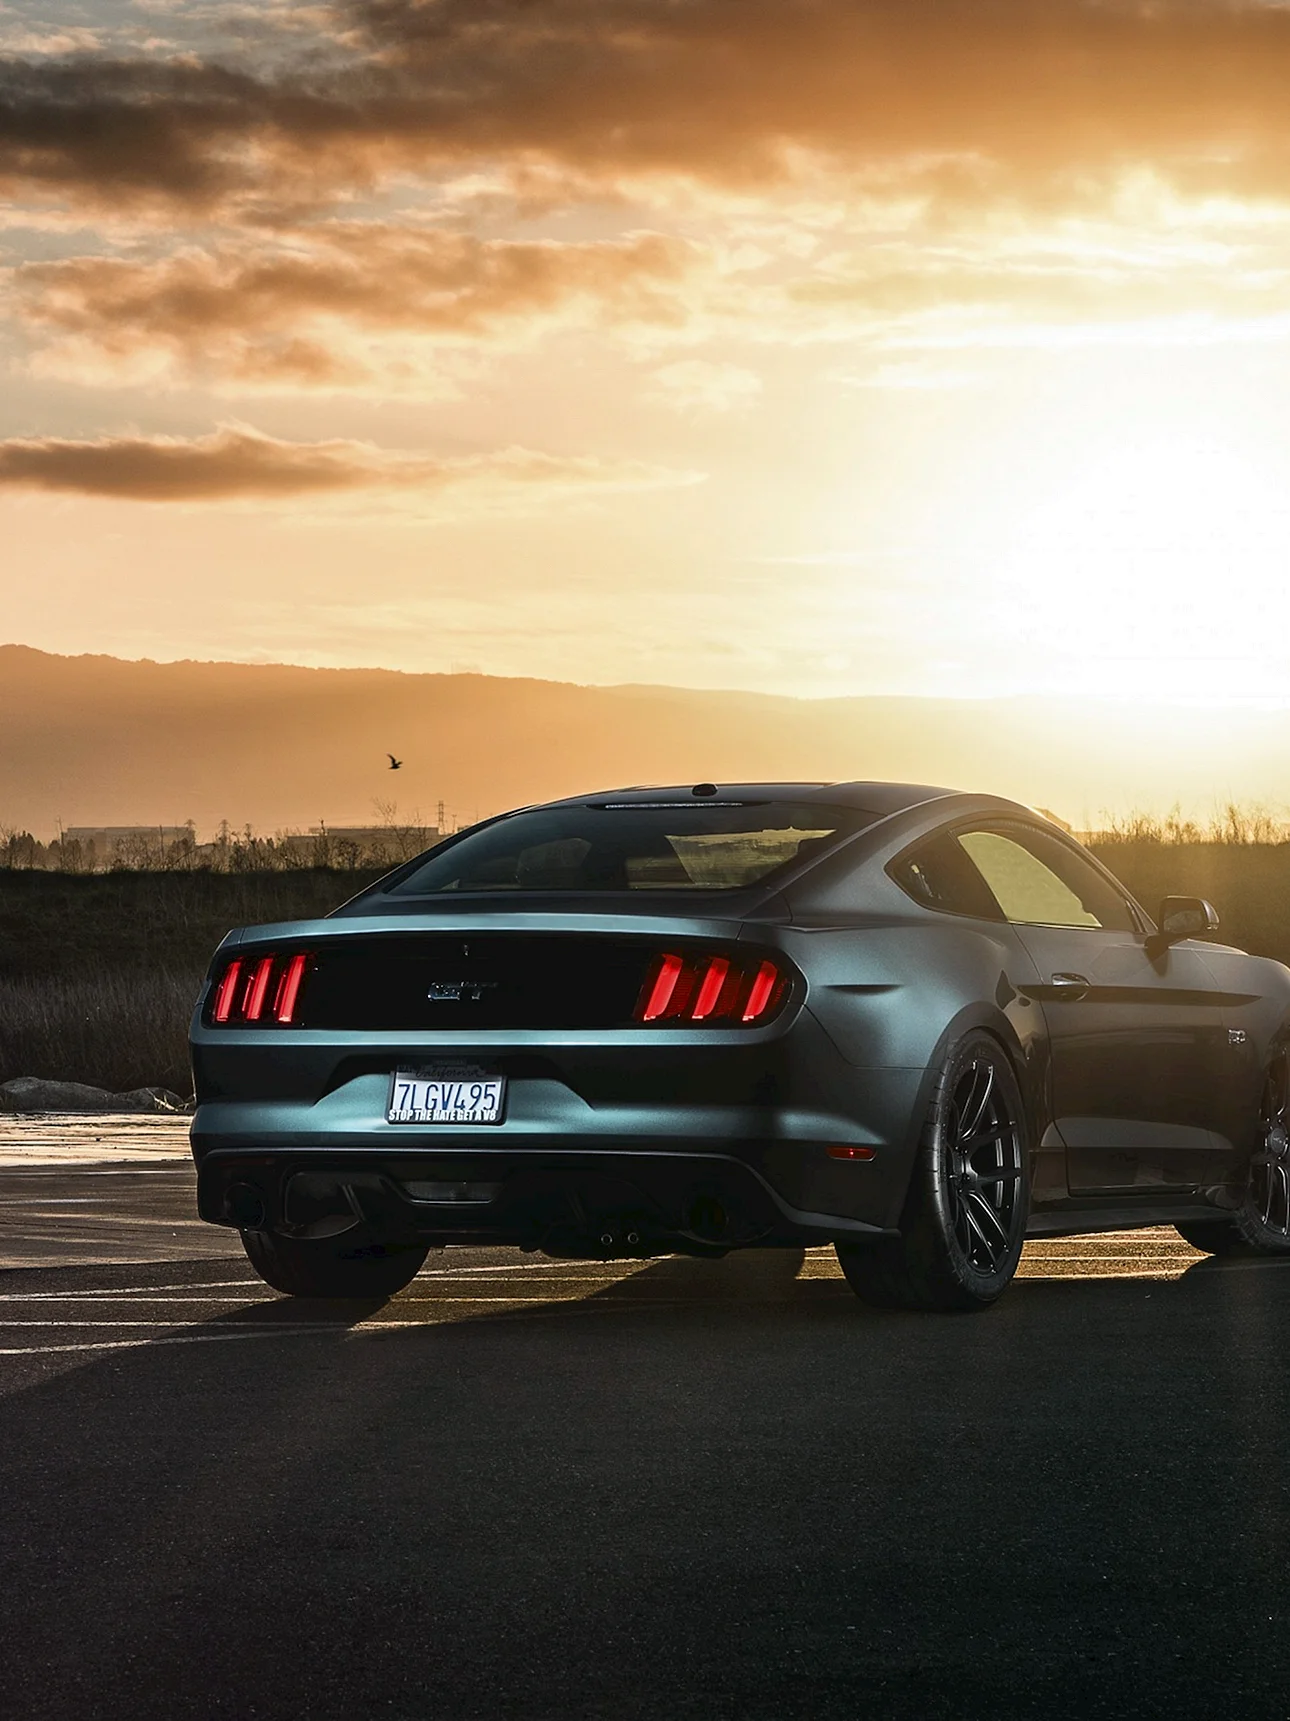 Ford Mustang 2015 Wallpaper For iPhone